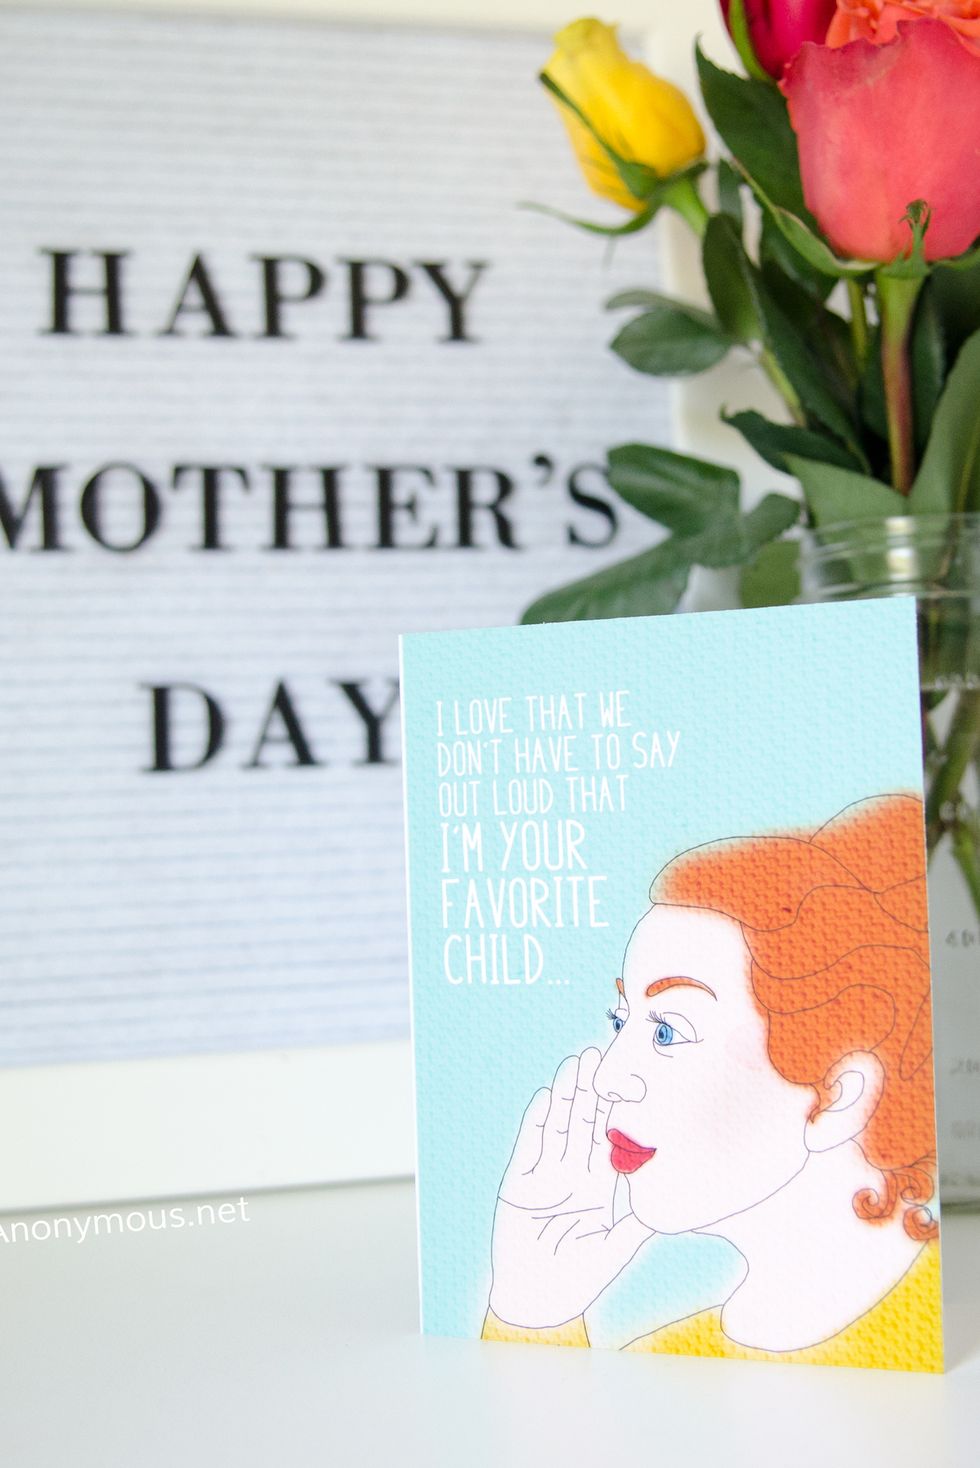 DIY Complete Card Making Kit for Boys & Girls 6 / Mothers' Day DIY Cards 